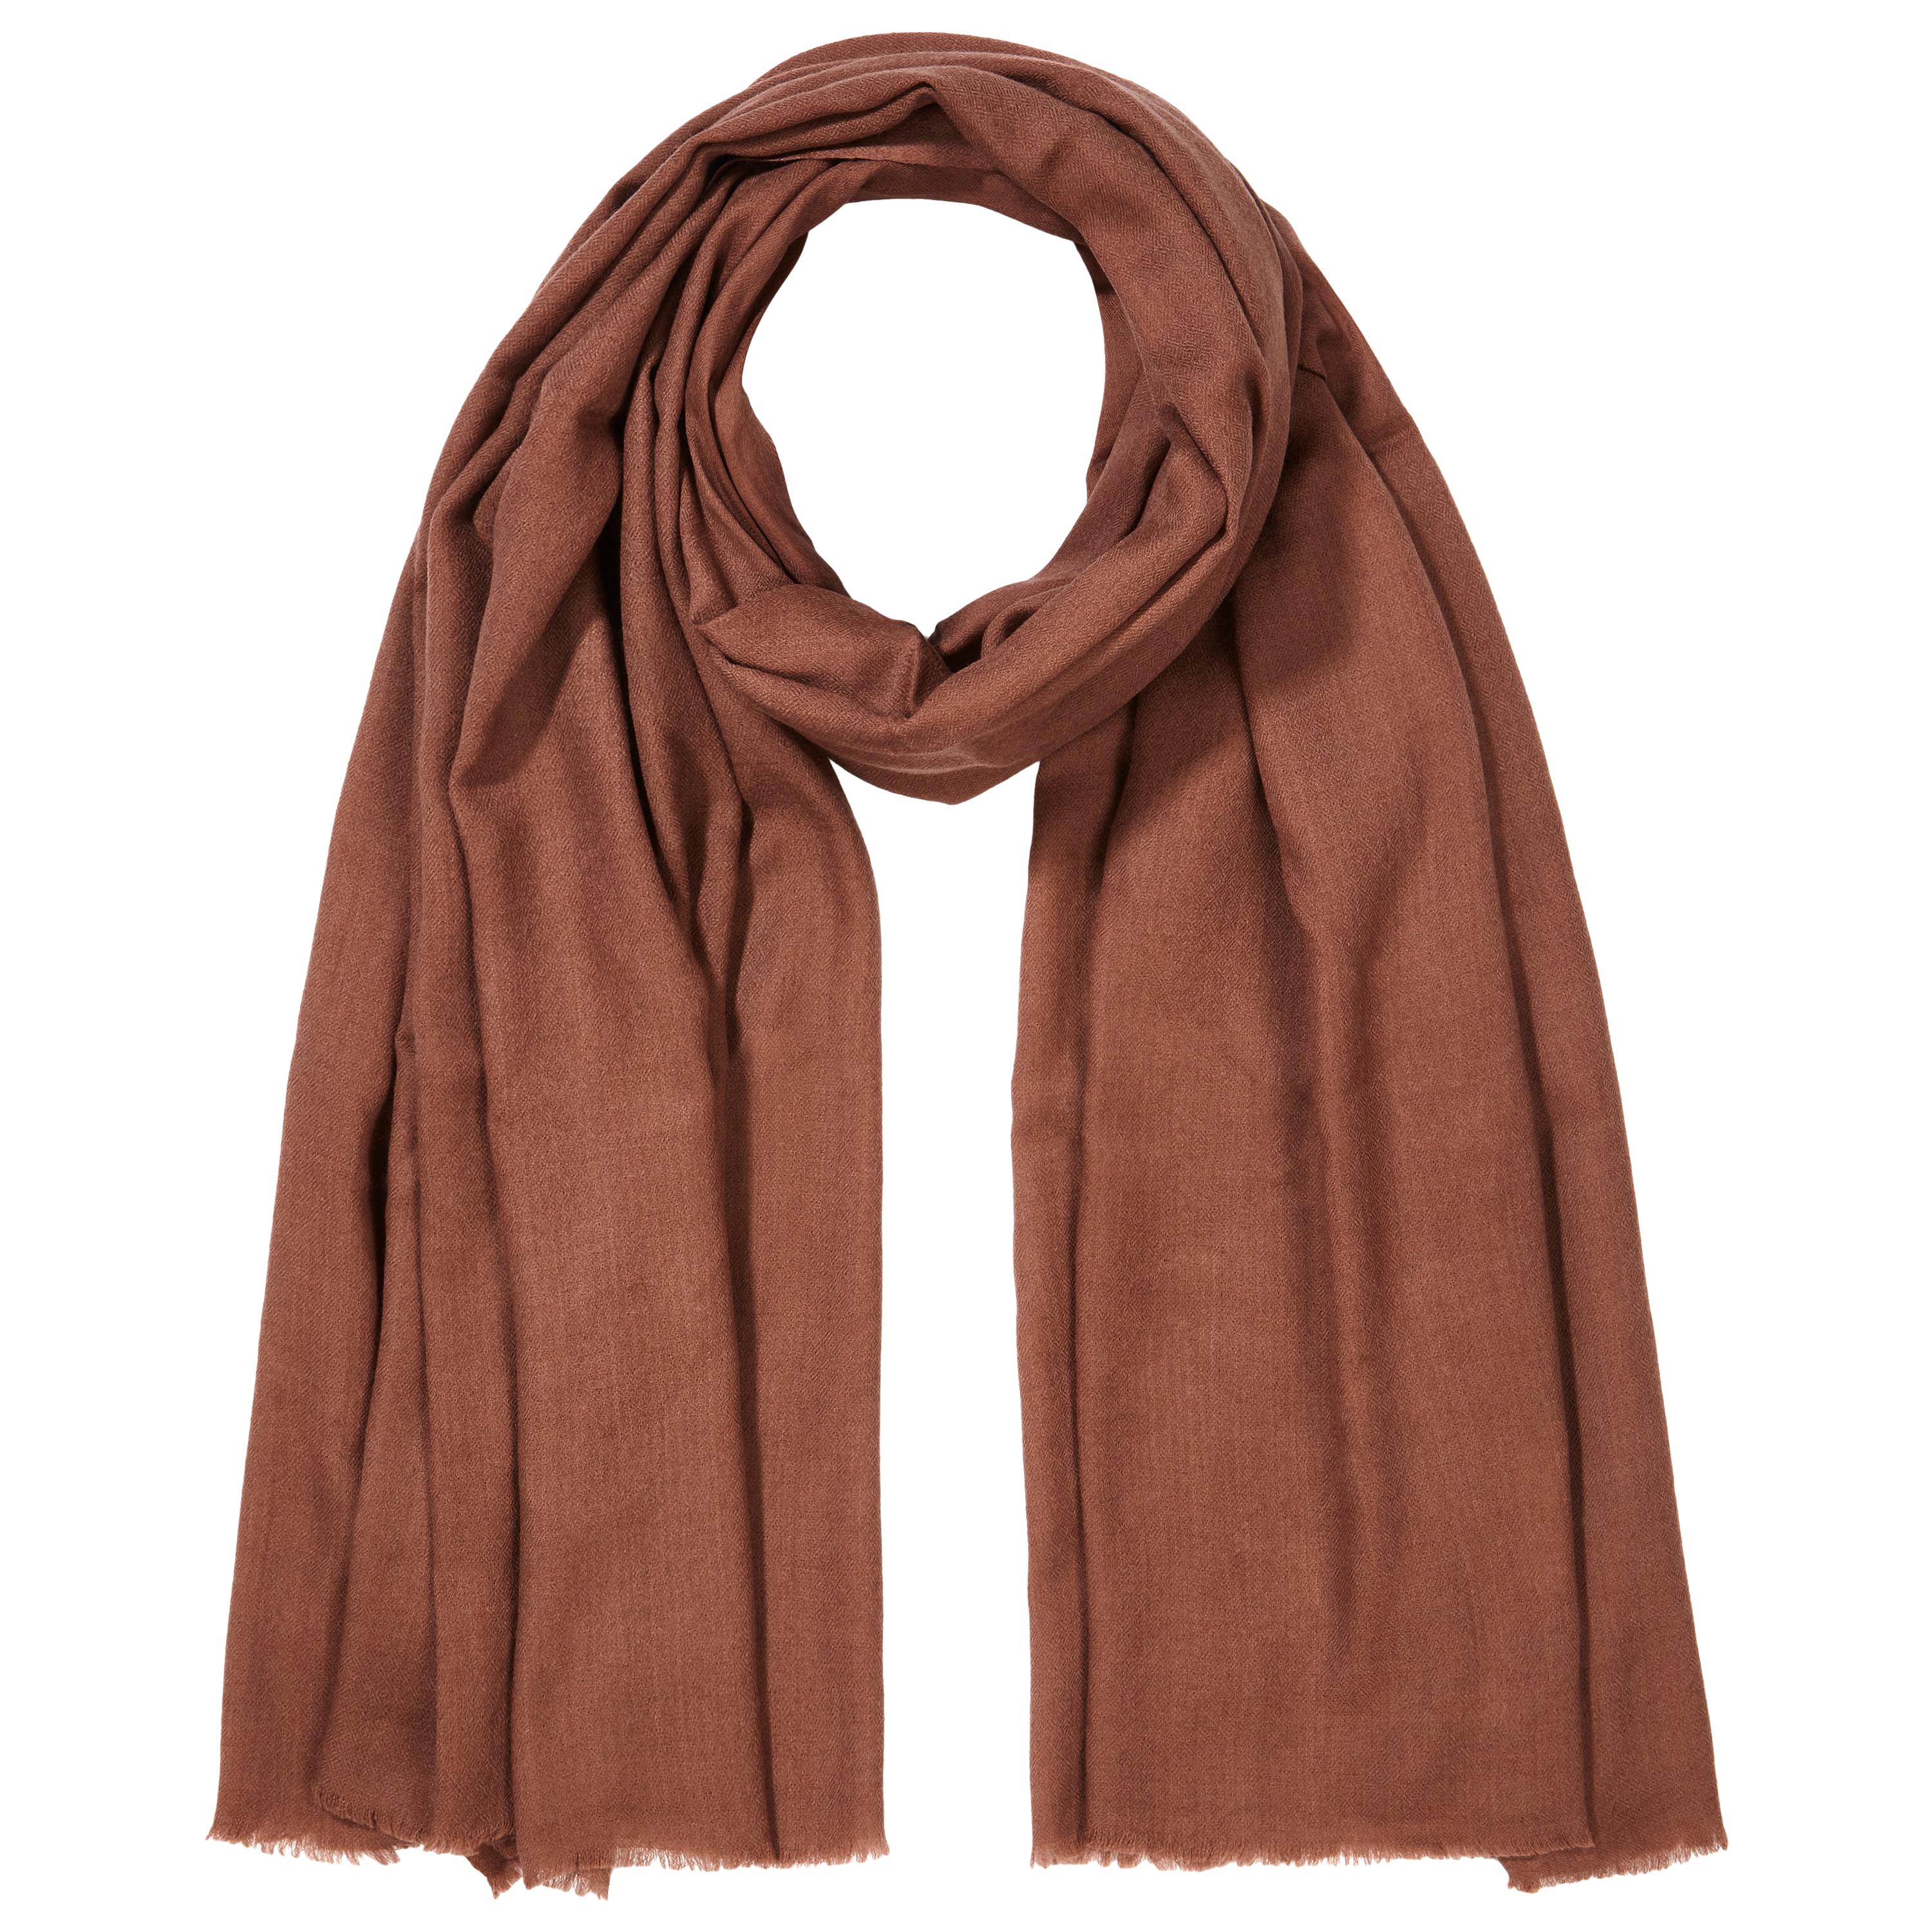 Cashmere Wool Shawl in Rose Chestnut Brown made in Kashmir India 